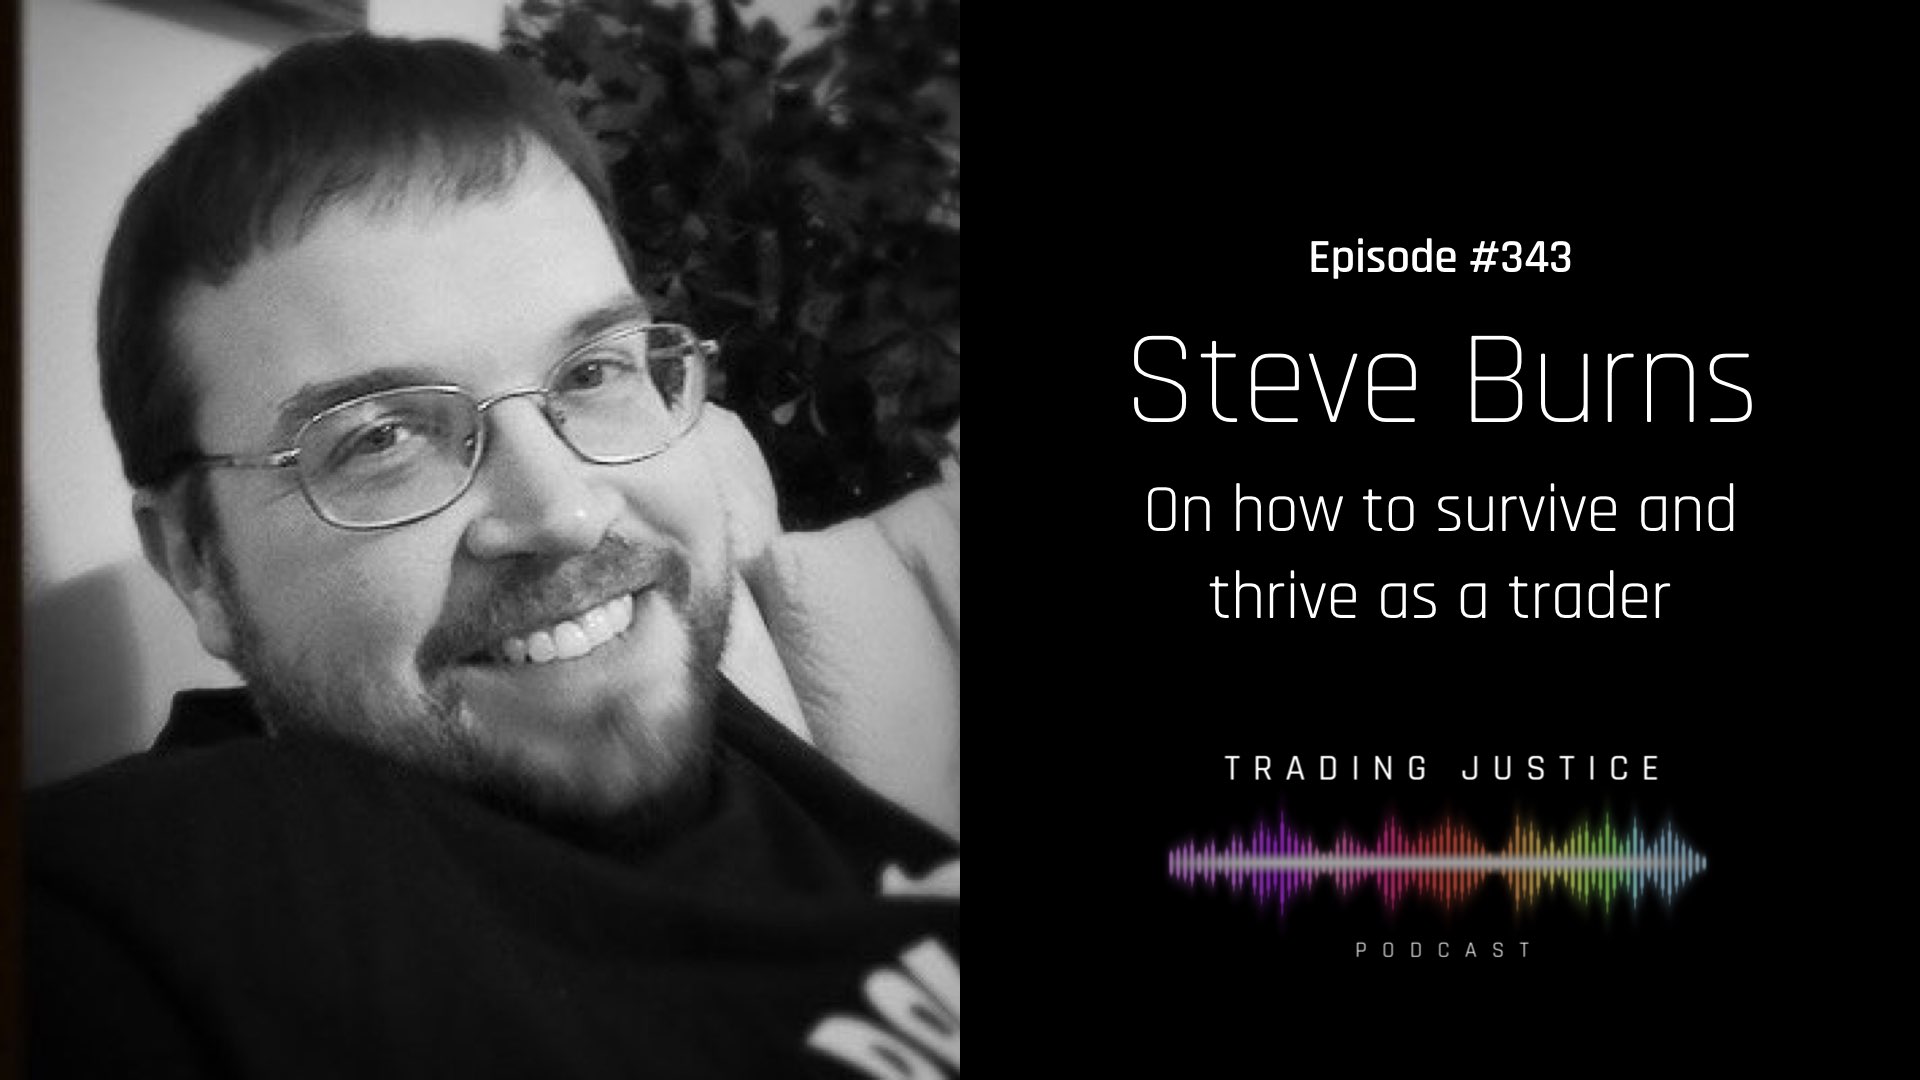 Trading Justice Episode 343 - Steve Burns on how to survive and thrive as a trader.